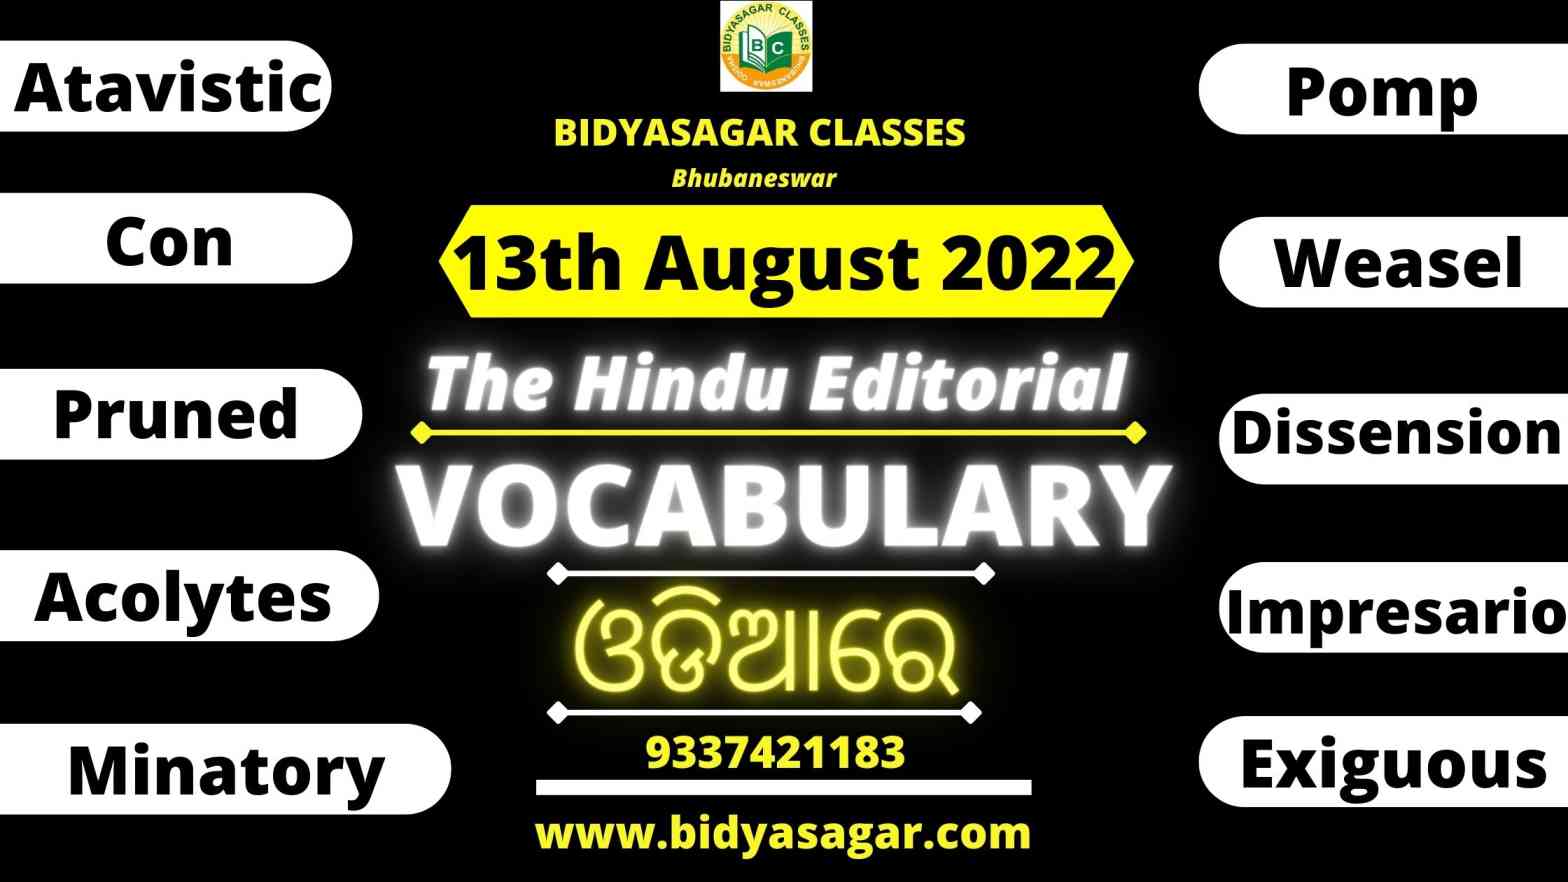 The Hindu Editorial Vocabulary of 13th August 2022